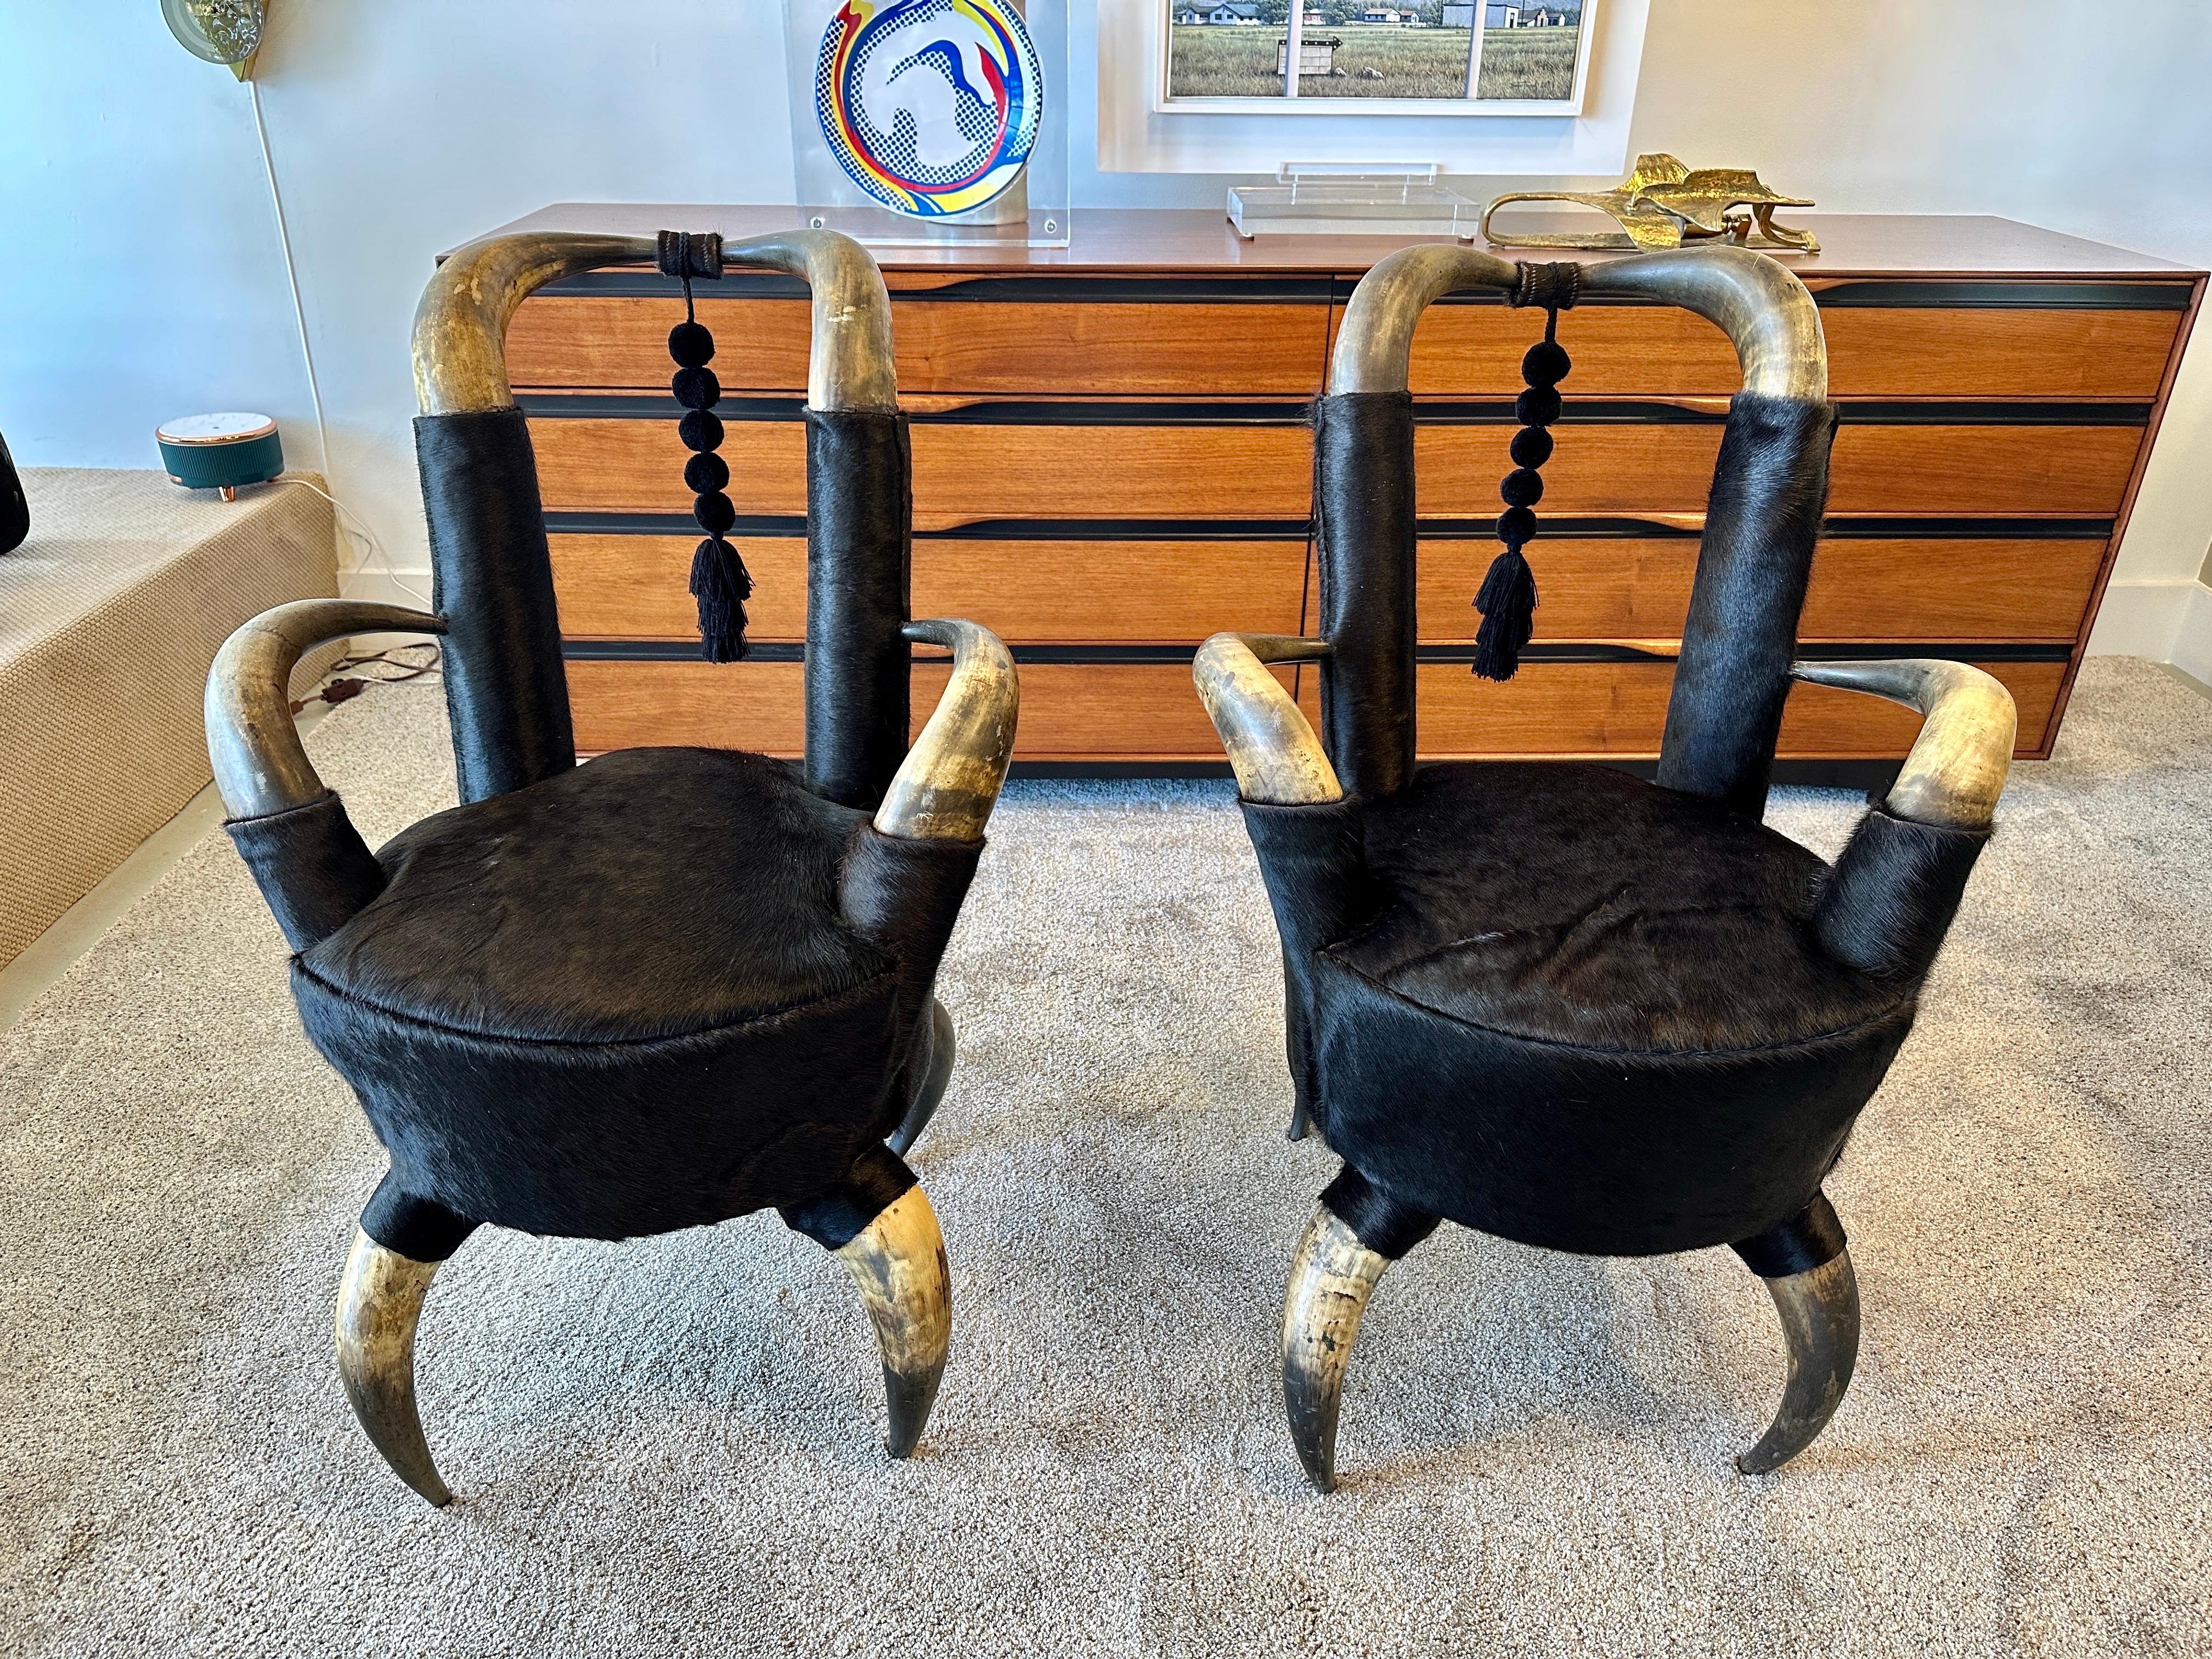 These are a beautiful matching pair of steer horn side chairs from the late 19th C., recently reupholstered with deep black cowhide leather. They are in the smaller scale for sitting (interior width is 13 inches and depth is 17 inches). SEE ALL